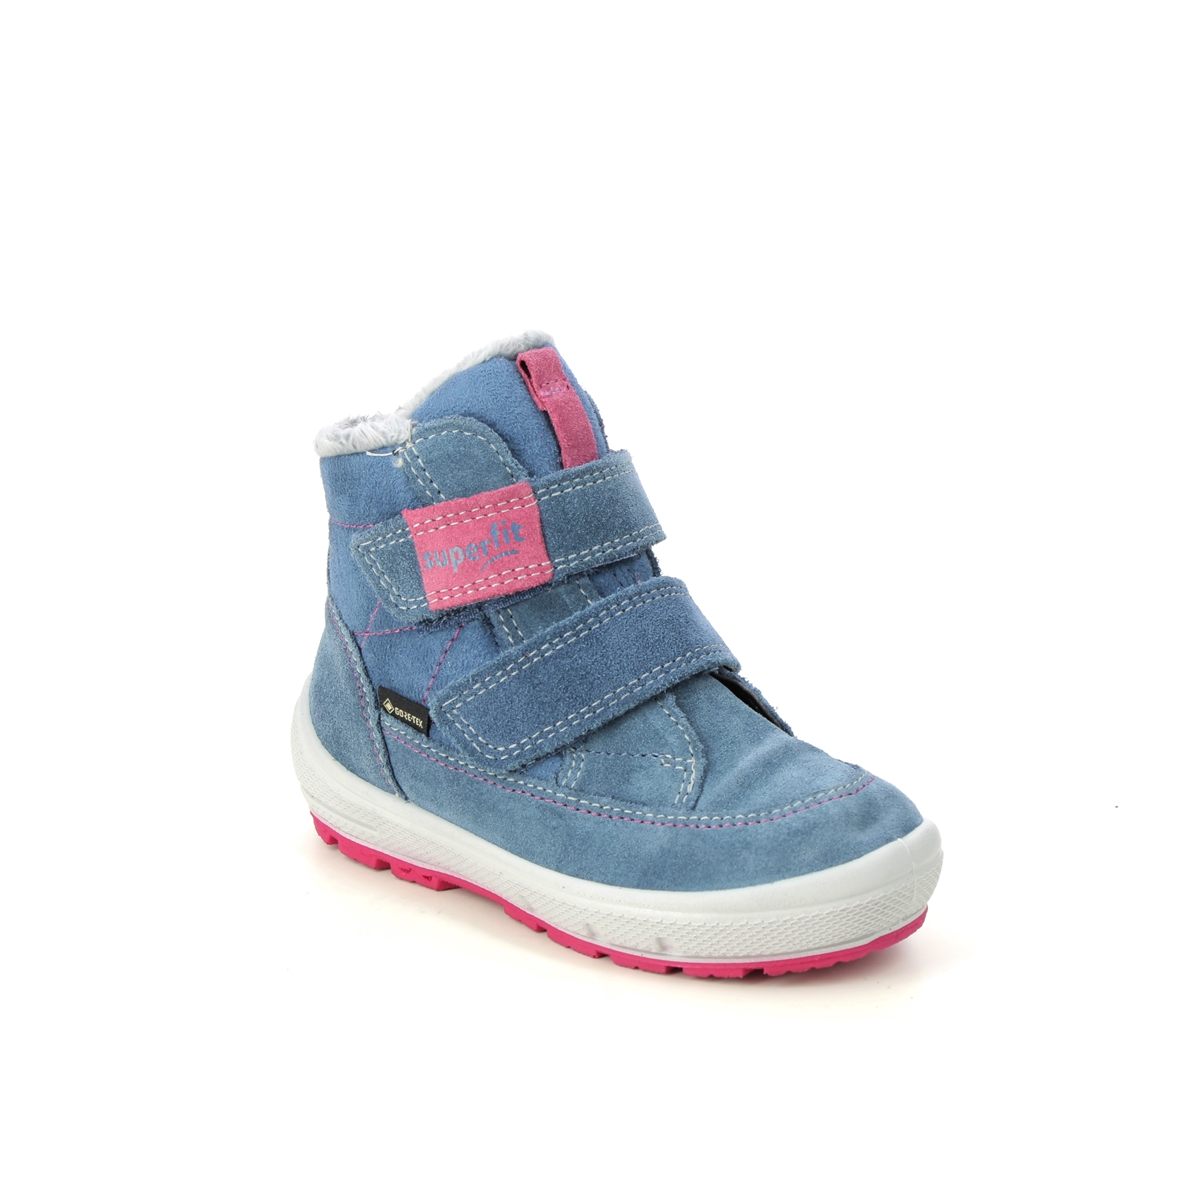 Superfit Groovy Gtx Blue Suede Kids Toddler Girls Boots 1009314-8020 in a Plain Leather in Size 29